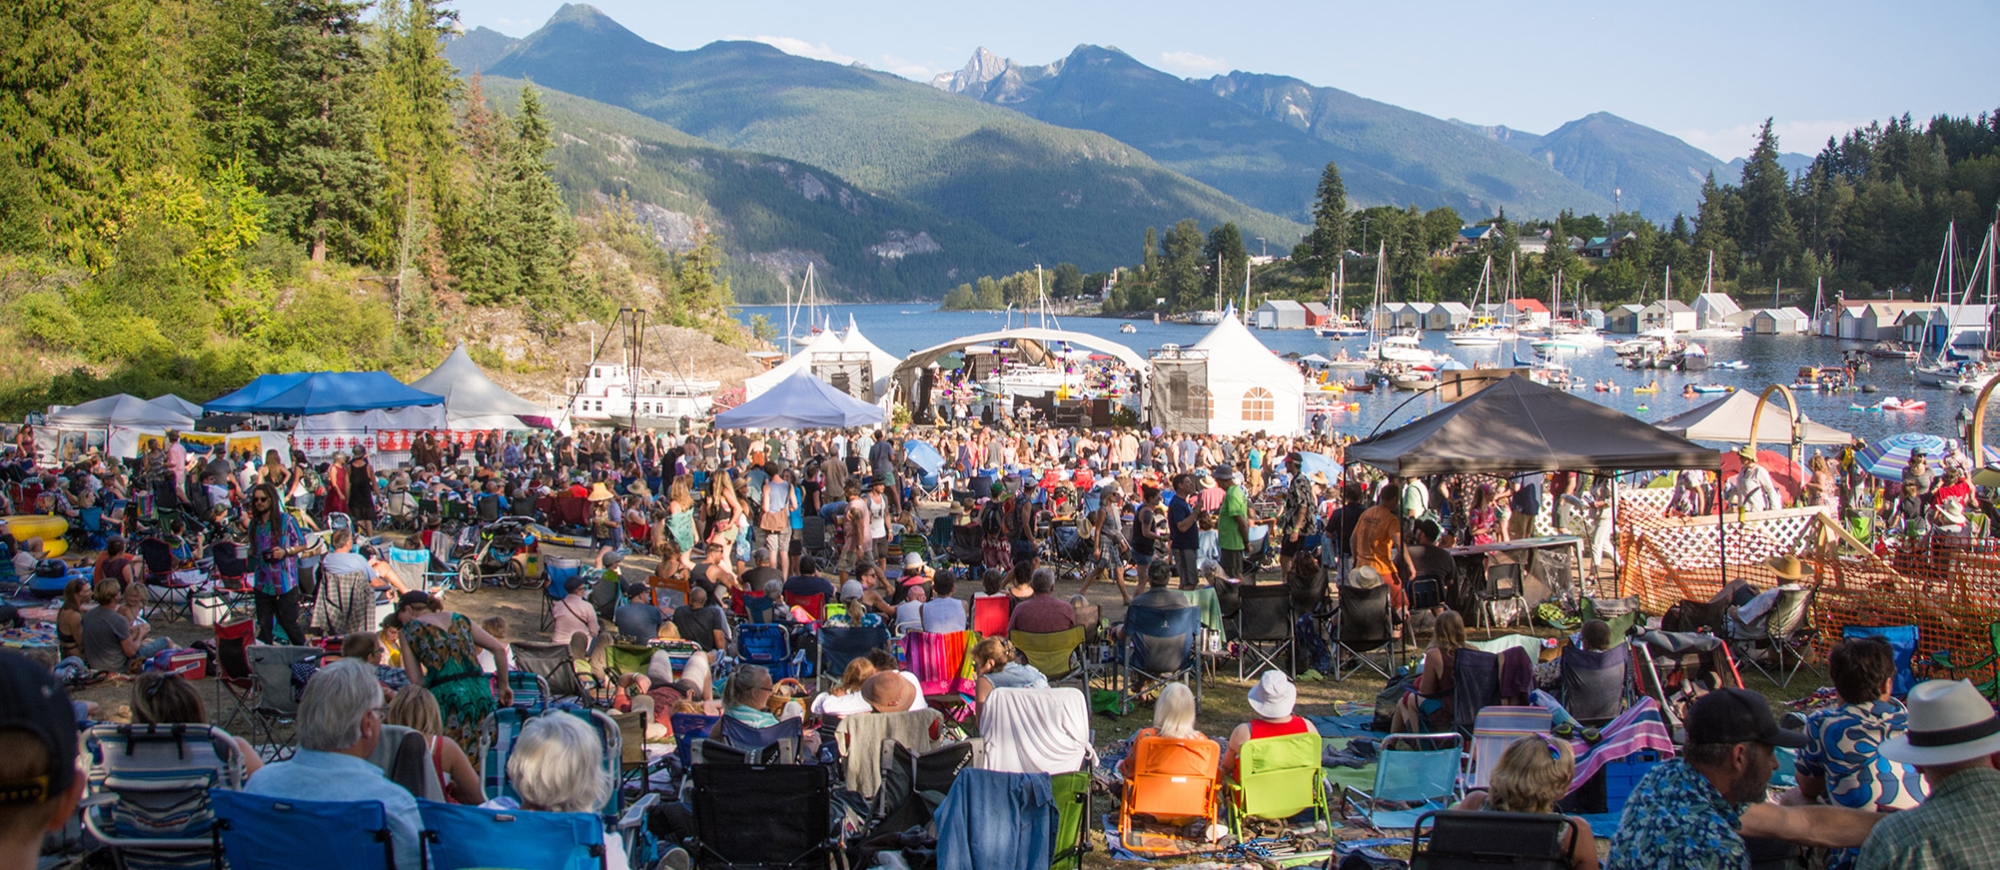 People sitting on the grass looking towards the floating stage on a sunny day at kaslo jazz festival